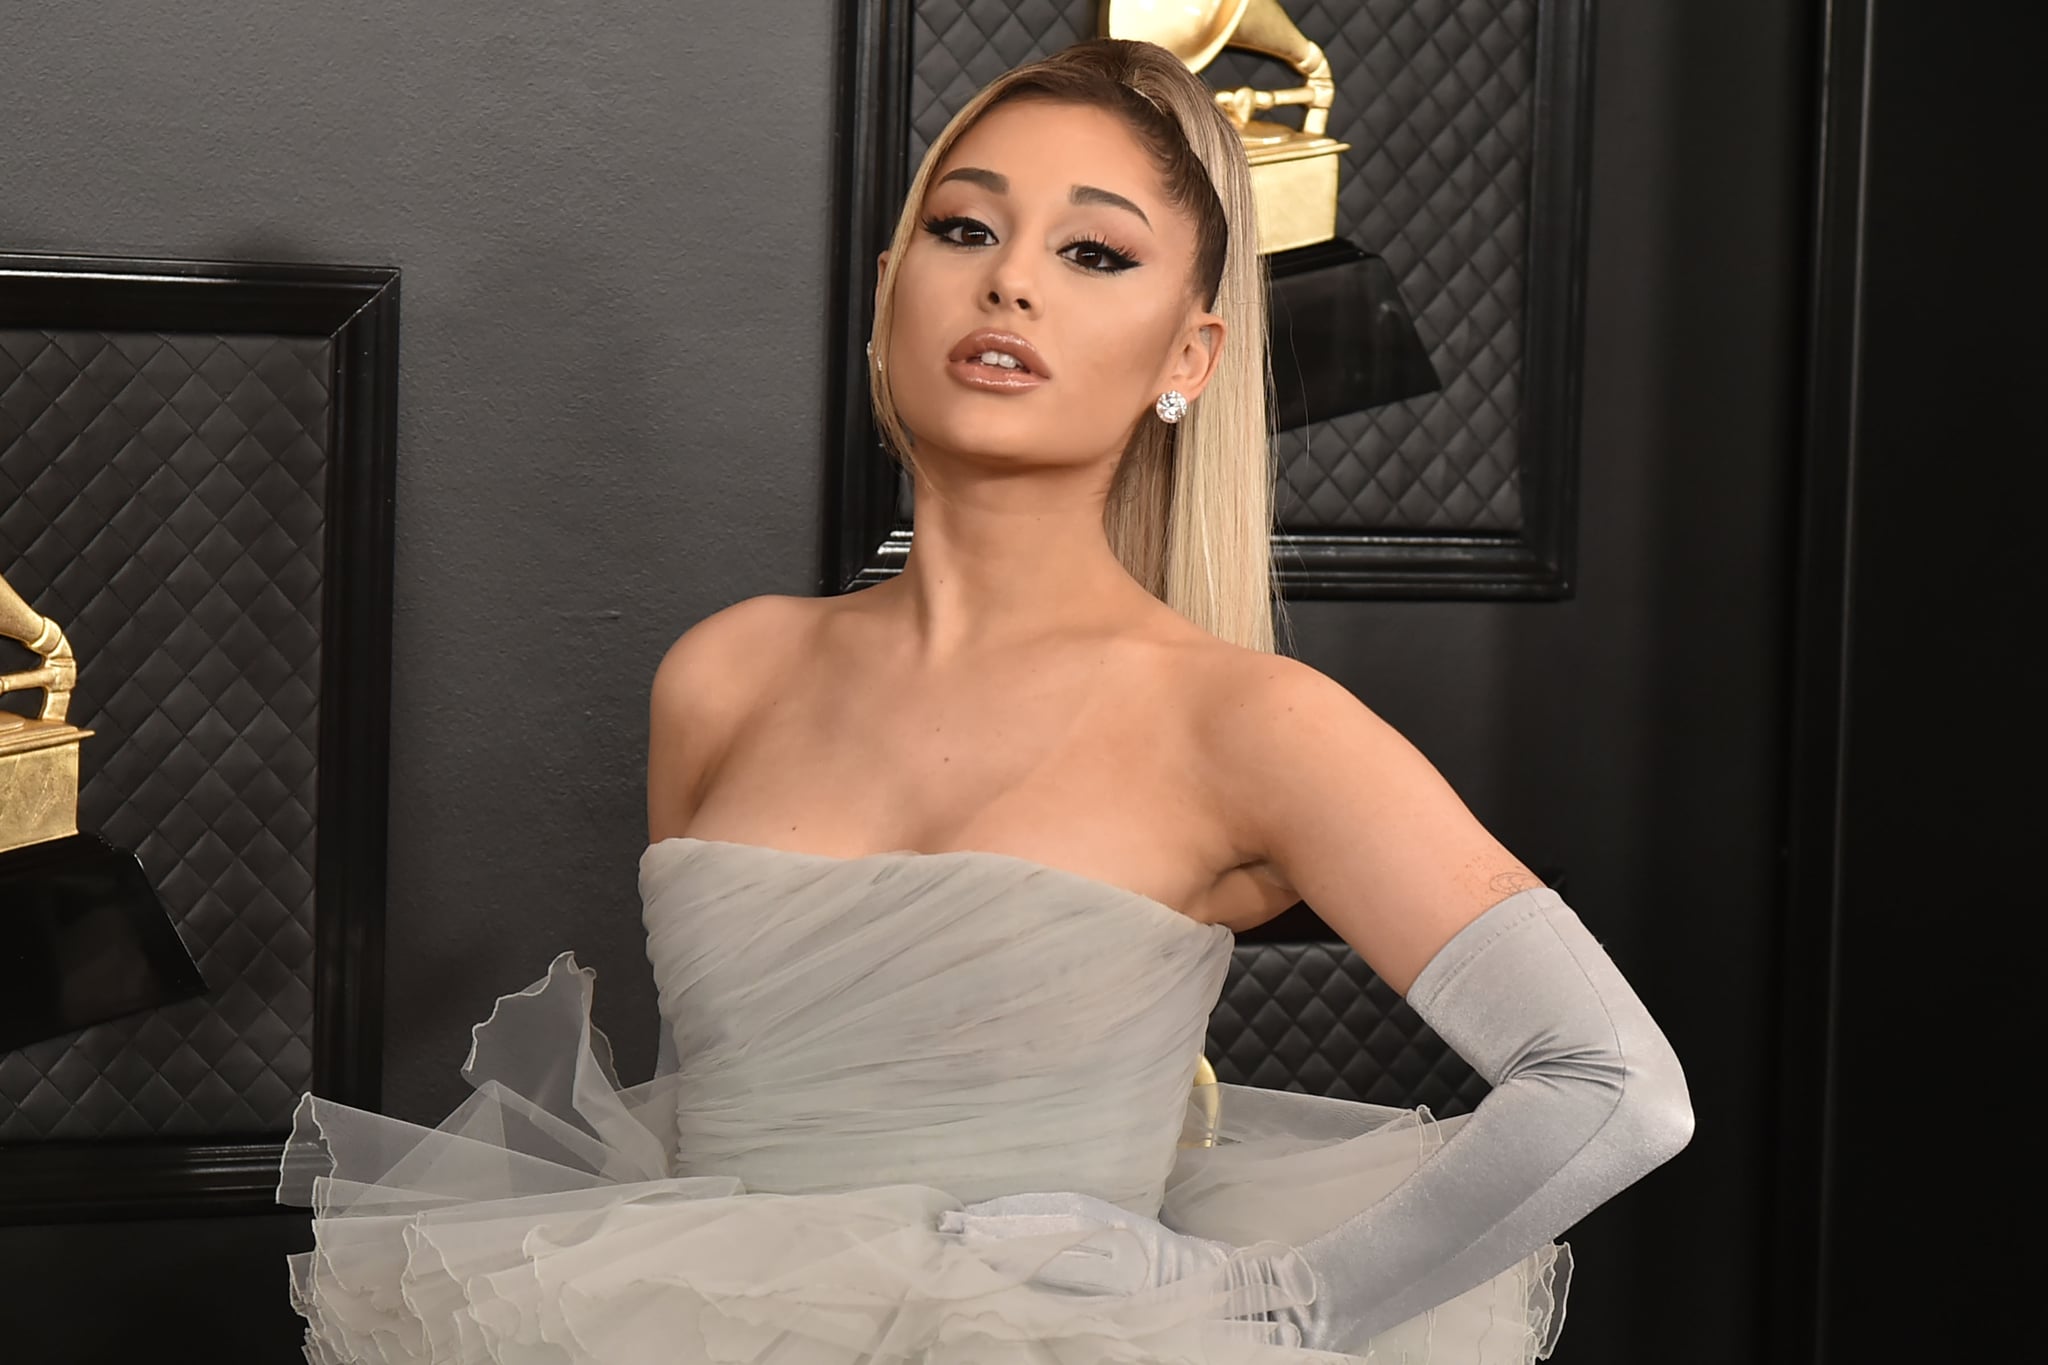 LOS ANGELES, CA - JANUARY 26: Ariana Grande attends the 62nd Annual Grammy Awards at Staples Centre on January 26, 2020 in Los Angeles, CA. (Photo by David Crotty/Patrick McMullan via Getty Images)